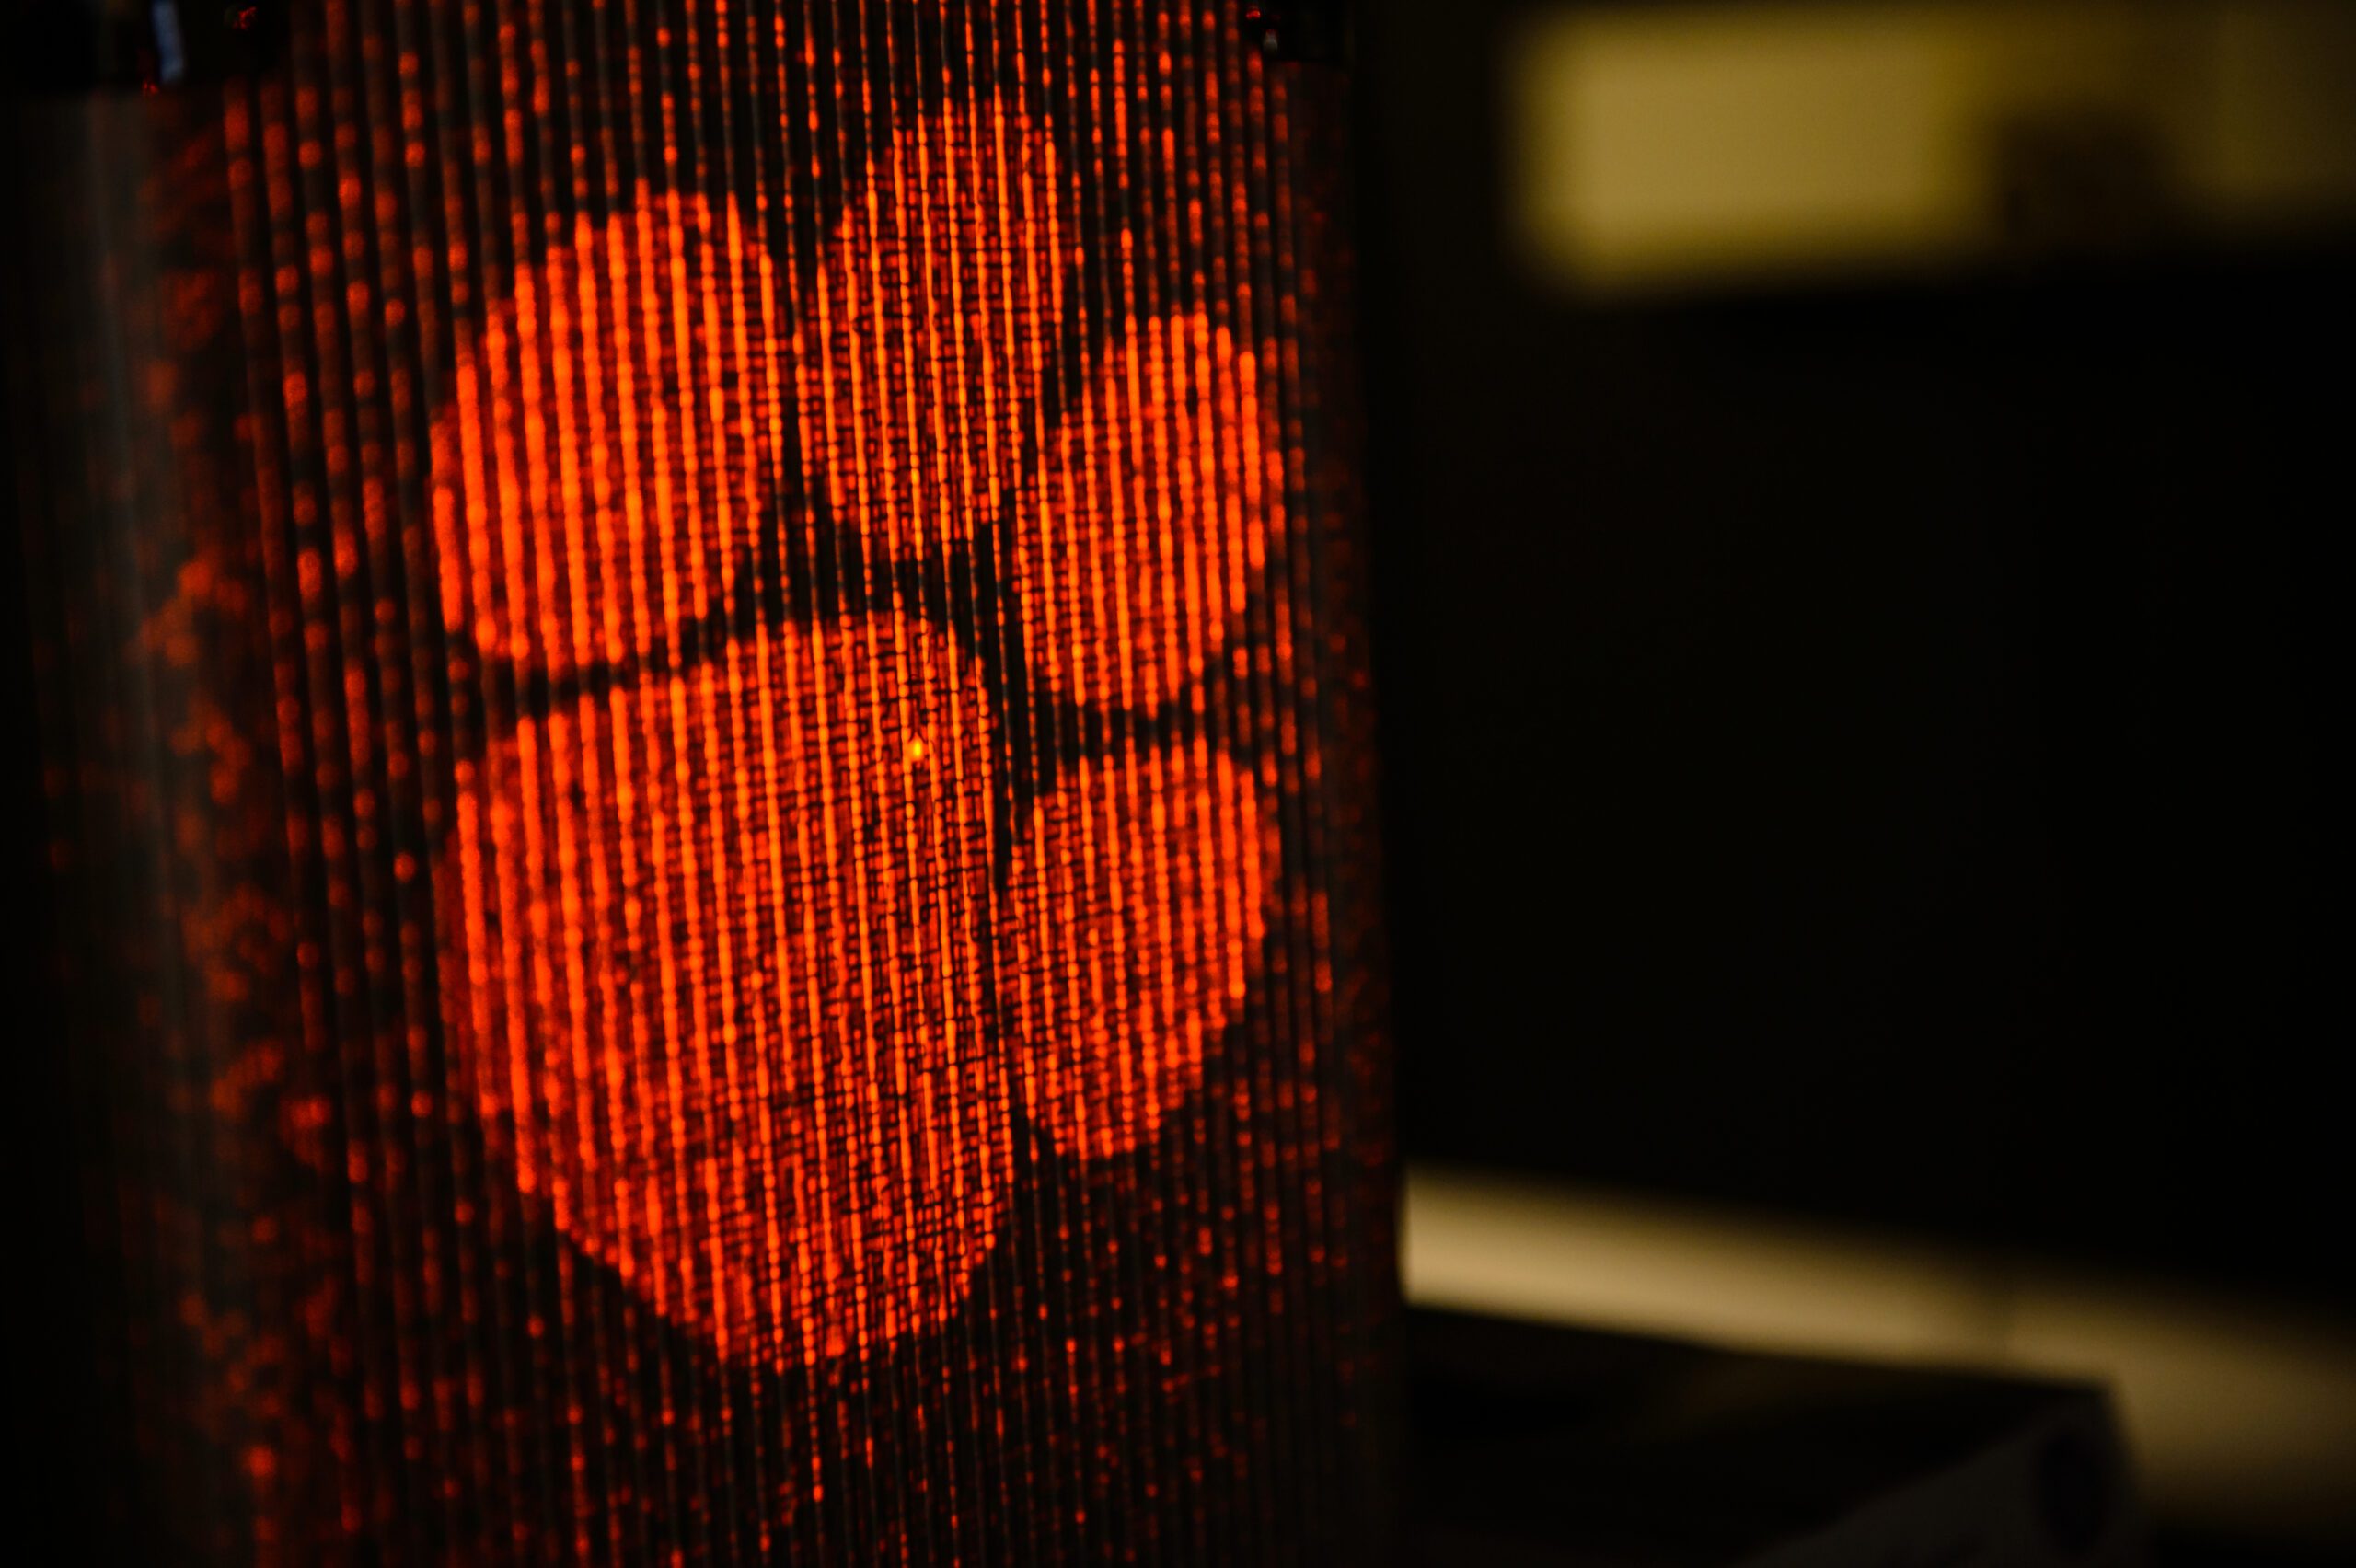 A close up of a tiger paw shining in the tail-light of a vehicle.